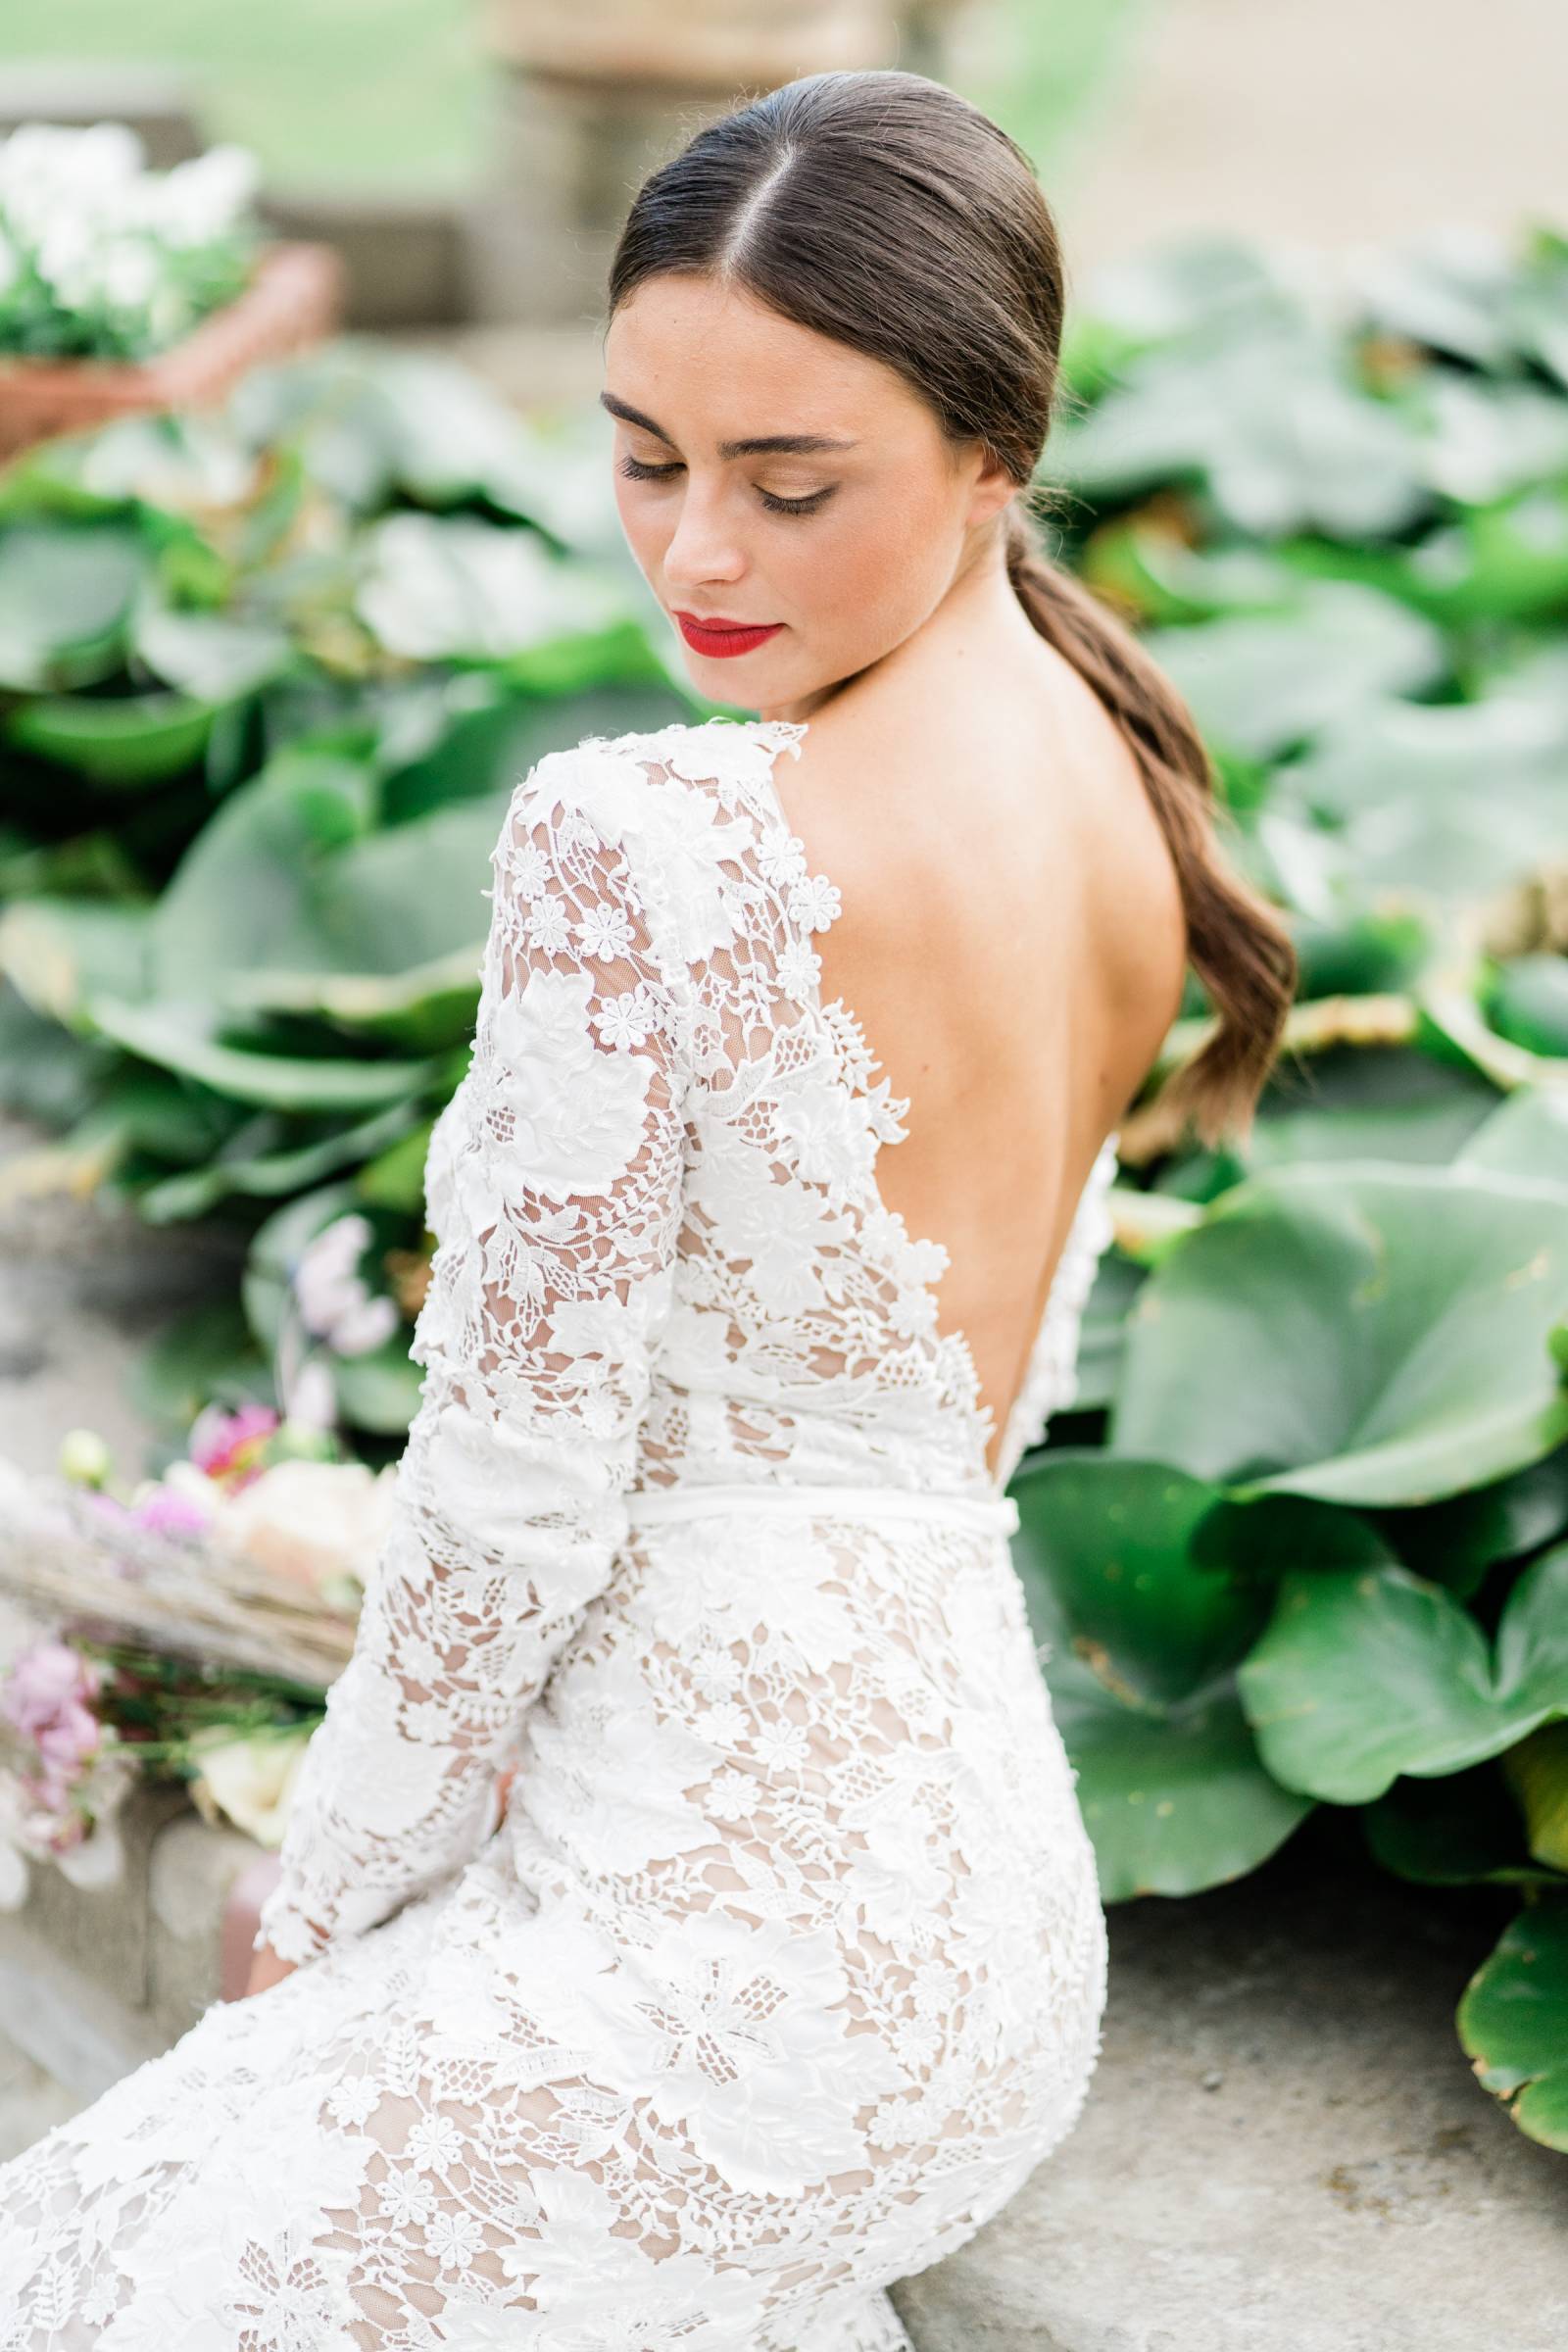 Mystical Tuscany: A creative bridal editorial for the mindful bride ...